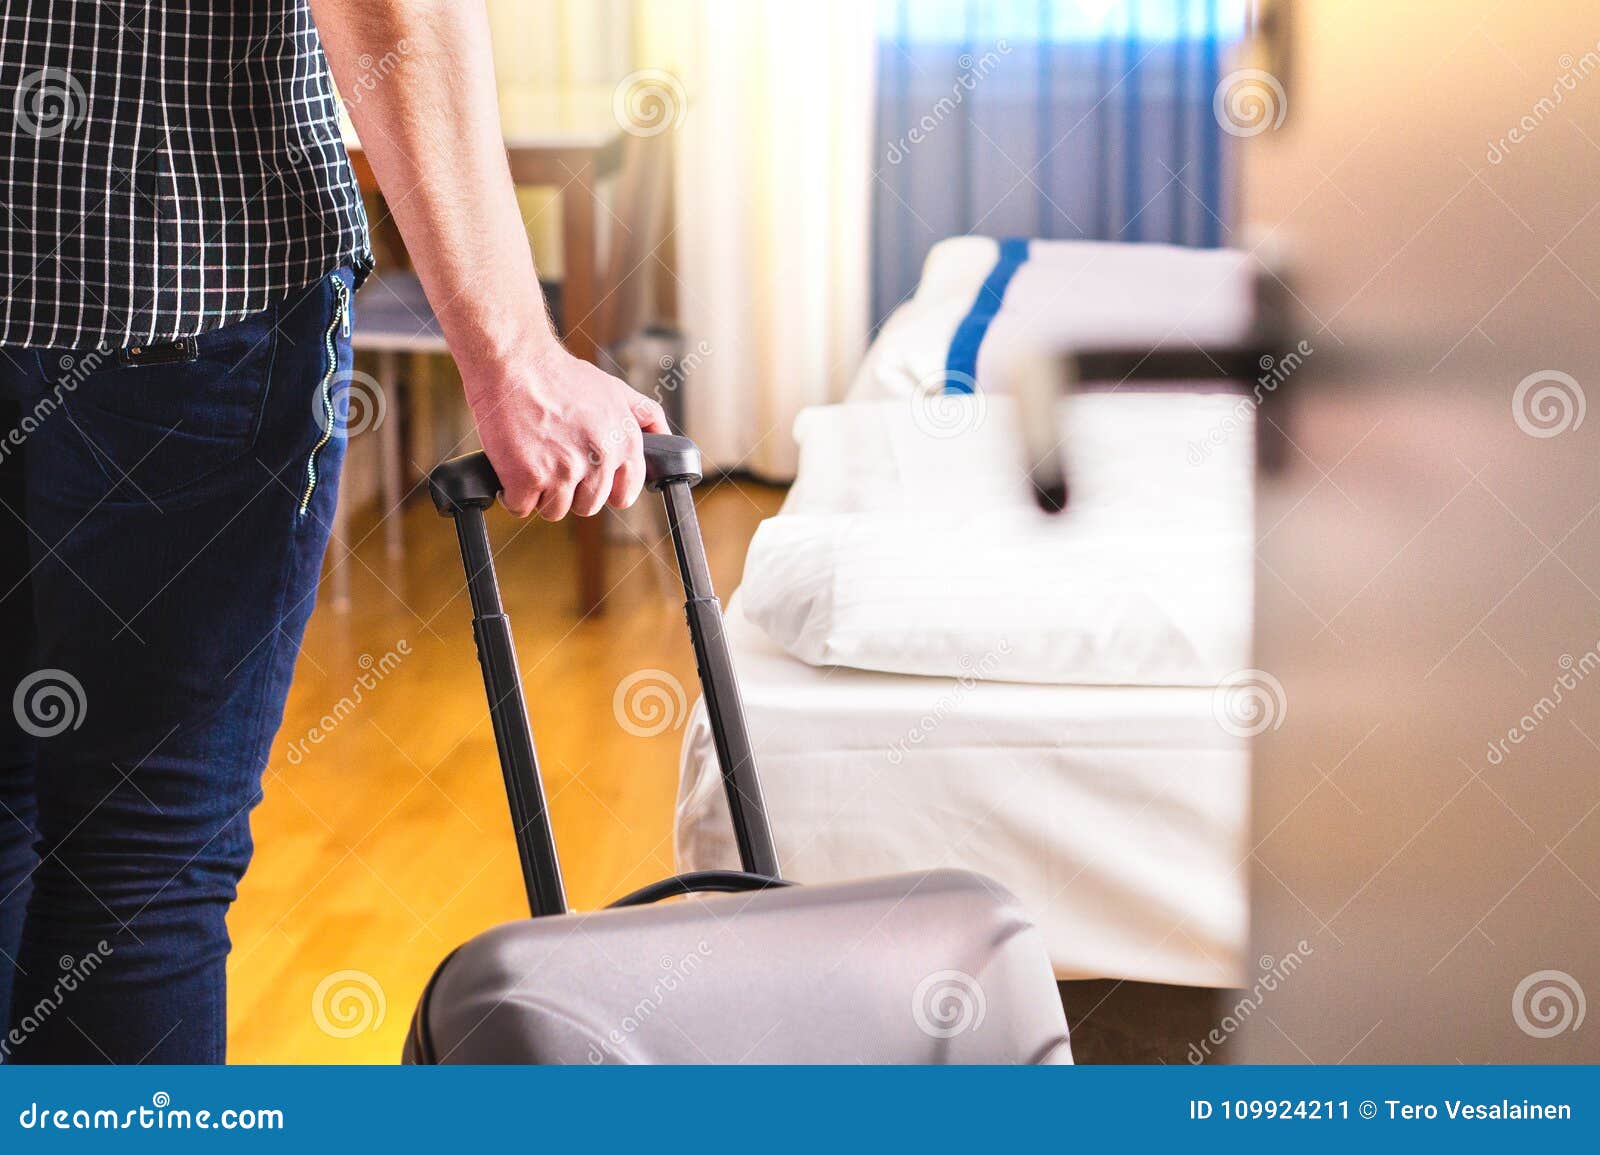 man pulling suitcase and entering hotel room.